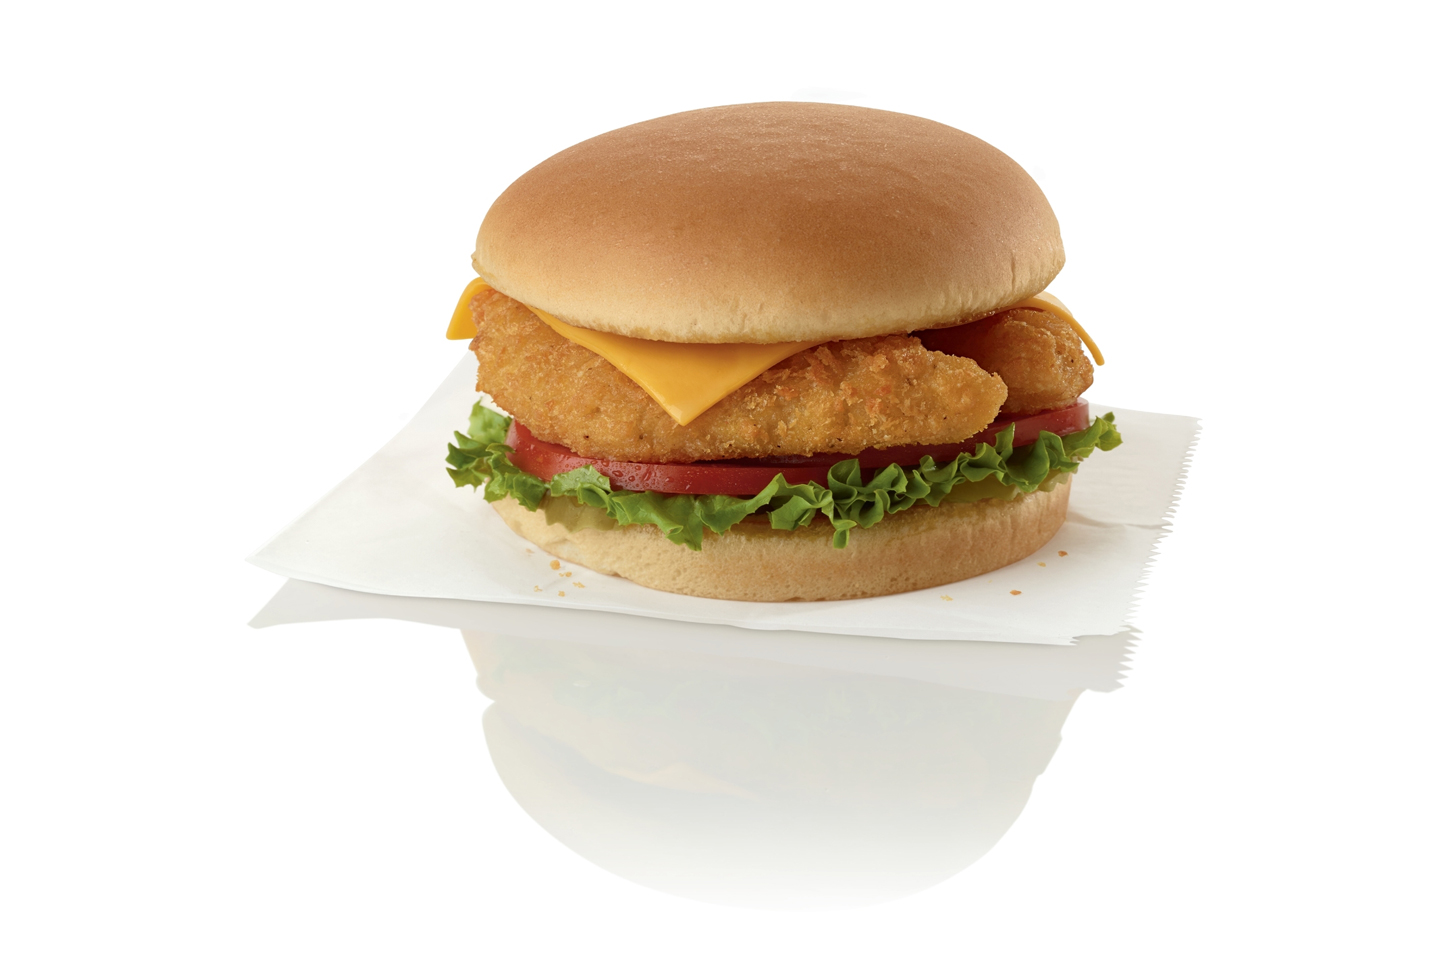 Chick-fil-A fish sandwiches during Lent. (Chick-fil-A photo)